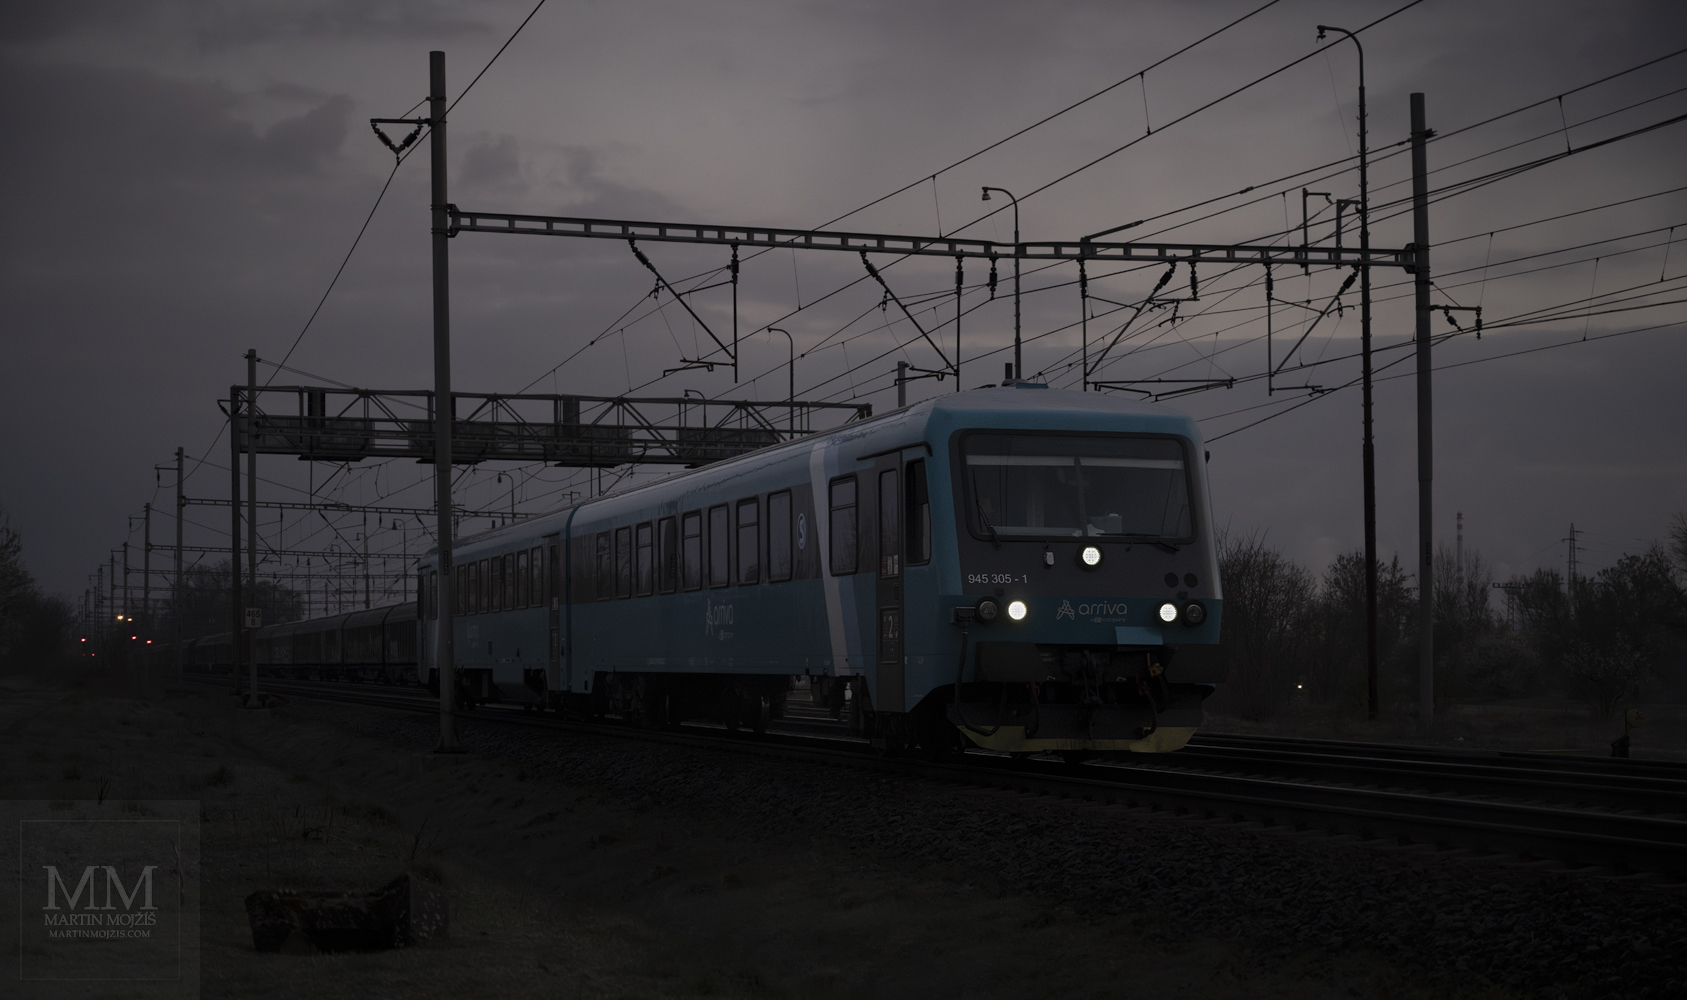 Motor unit 945 305-1 drives shortly after five o'clock in the morning in the direction of Kralupy nad Vltavou.